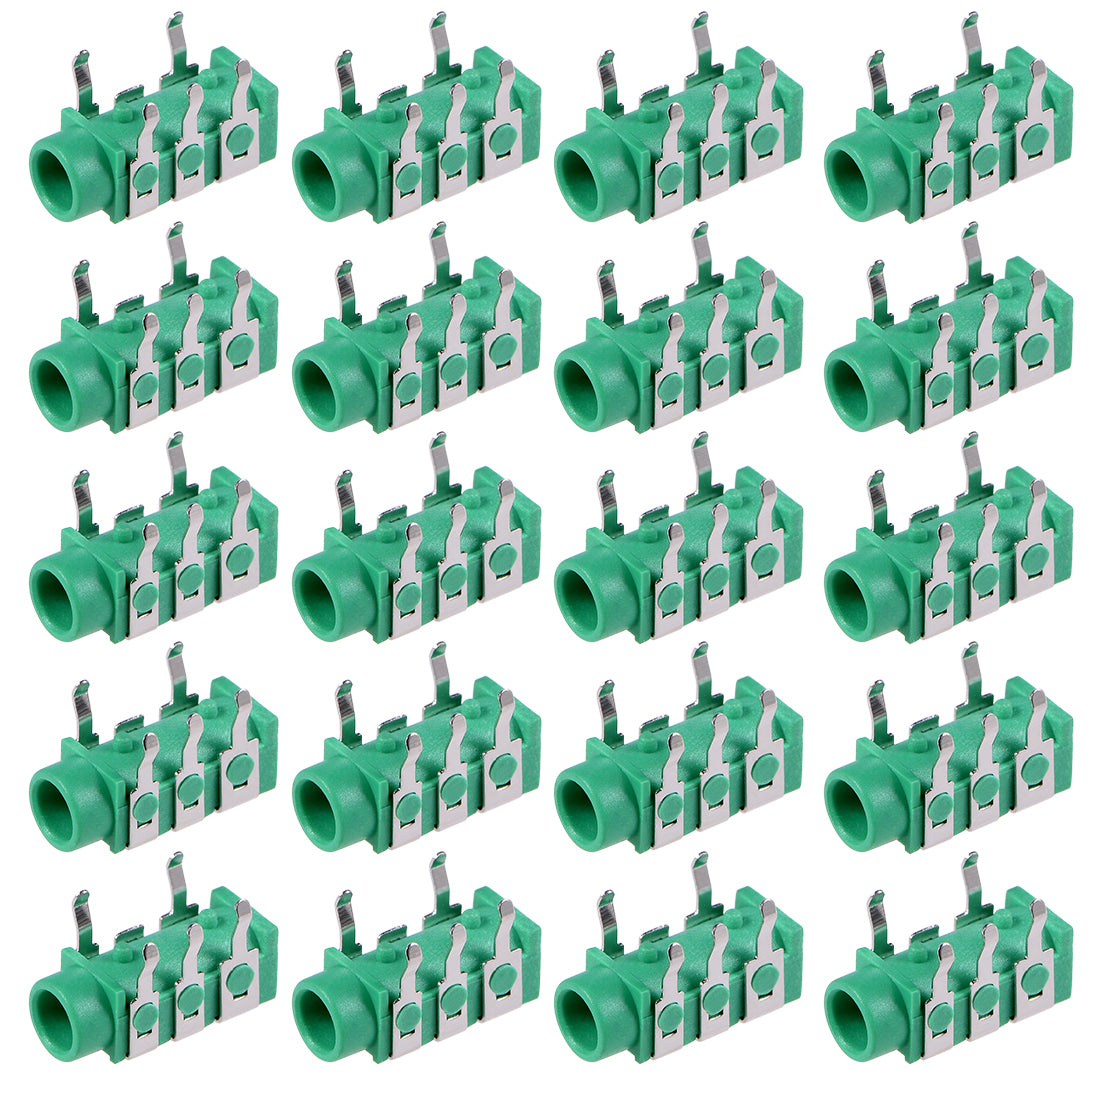 uxcell Uxcell 20Pcs PCB Mount 3.5mm 5 Pin Socket Headphone Stereo Jack Connector for Audio Video Green PJ-313B